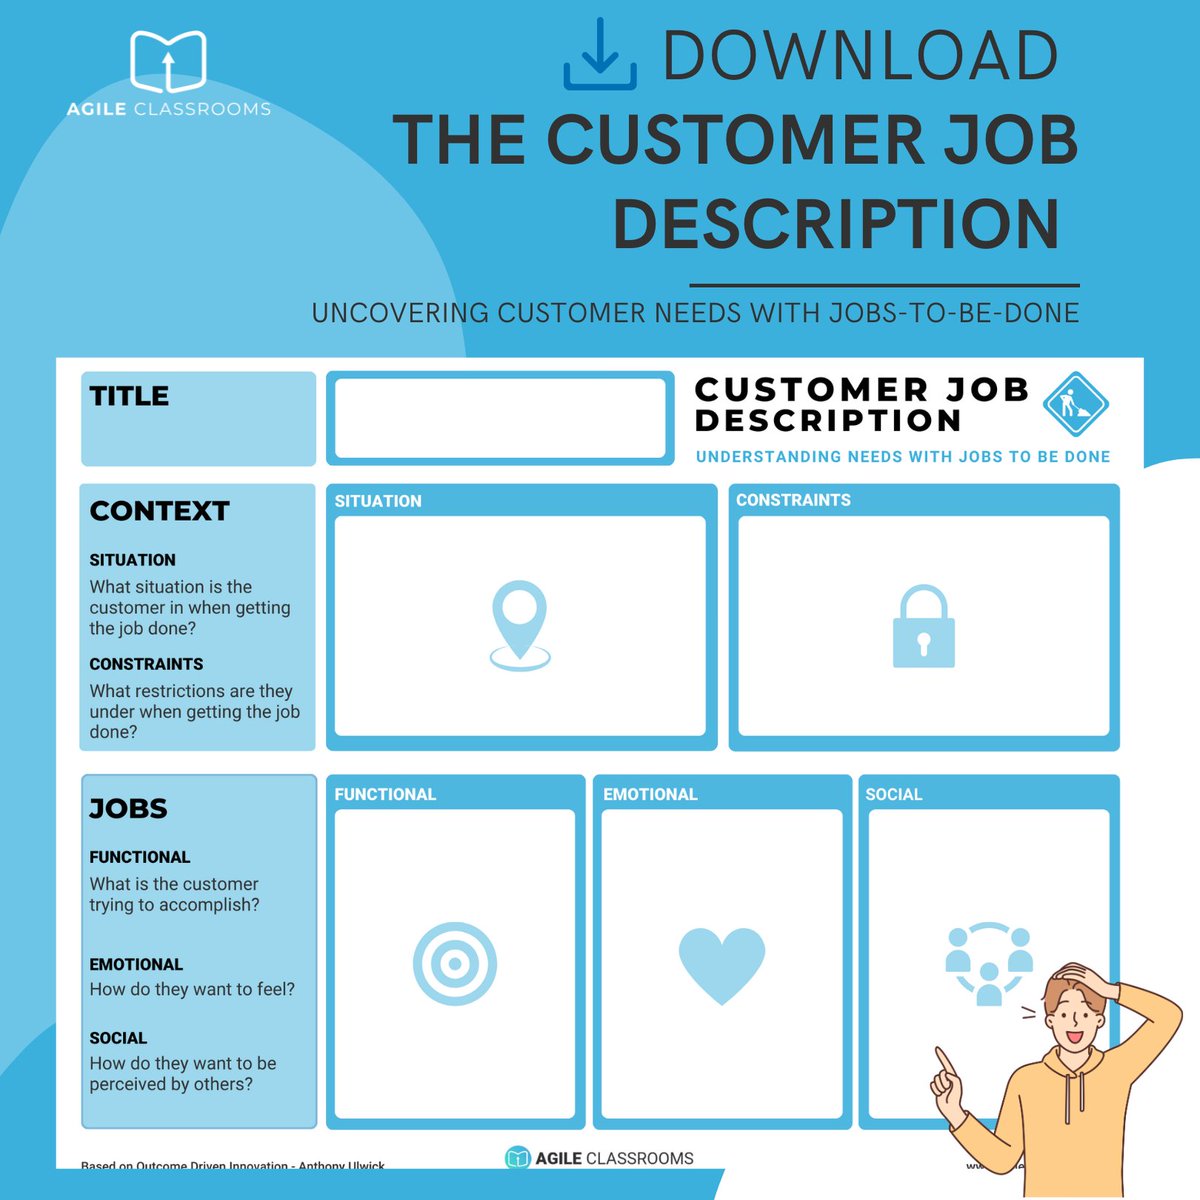 🚀 Simplify Customer Discovery 🚀

🛠️ Use our Job Description Template to simplify understanding what customers need in just 5 steps:
1️⃣ Context
2️⃣ Constraints
3️⃣ Functional Needs
4️⃣ Emotional
5️⃣ Social
👉postly.link/ikJ/
#CustomerDiscovery #JTBD